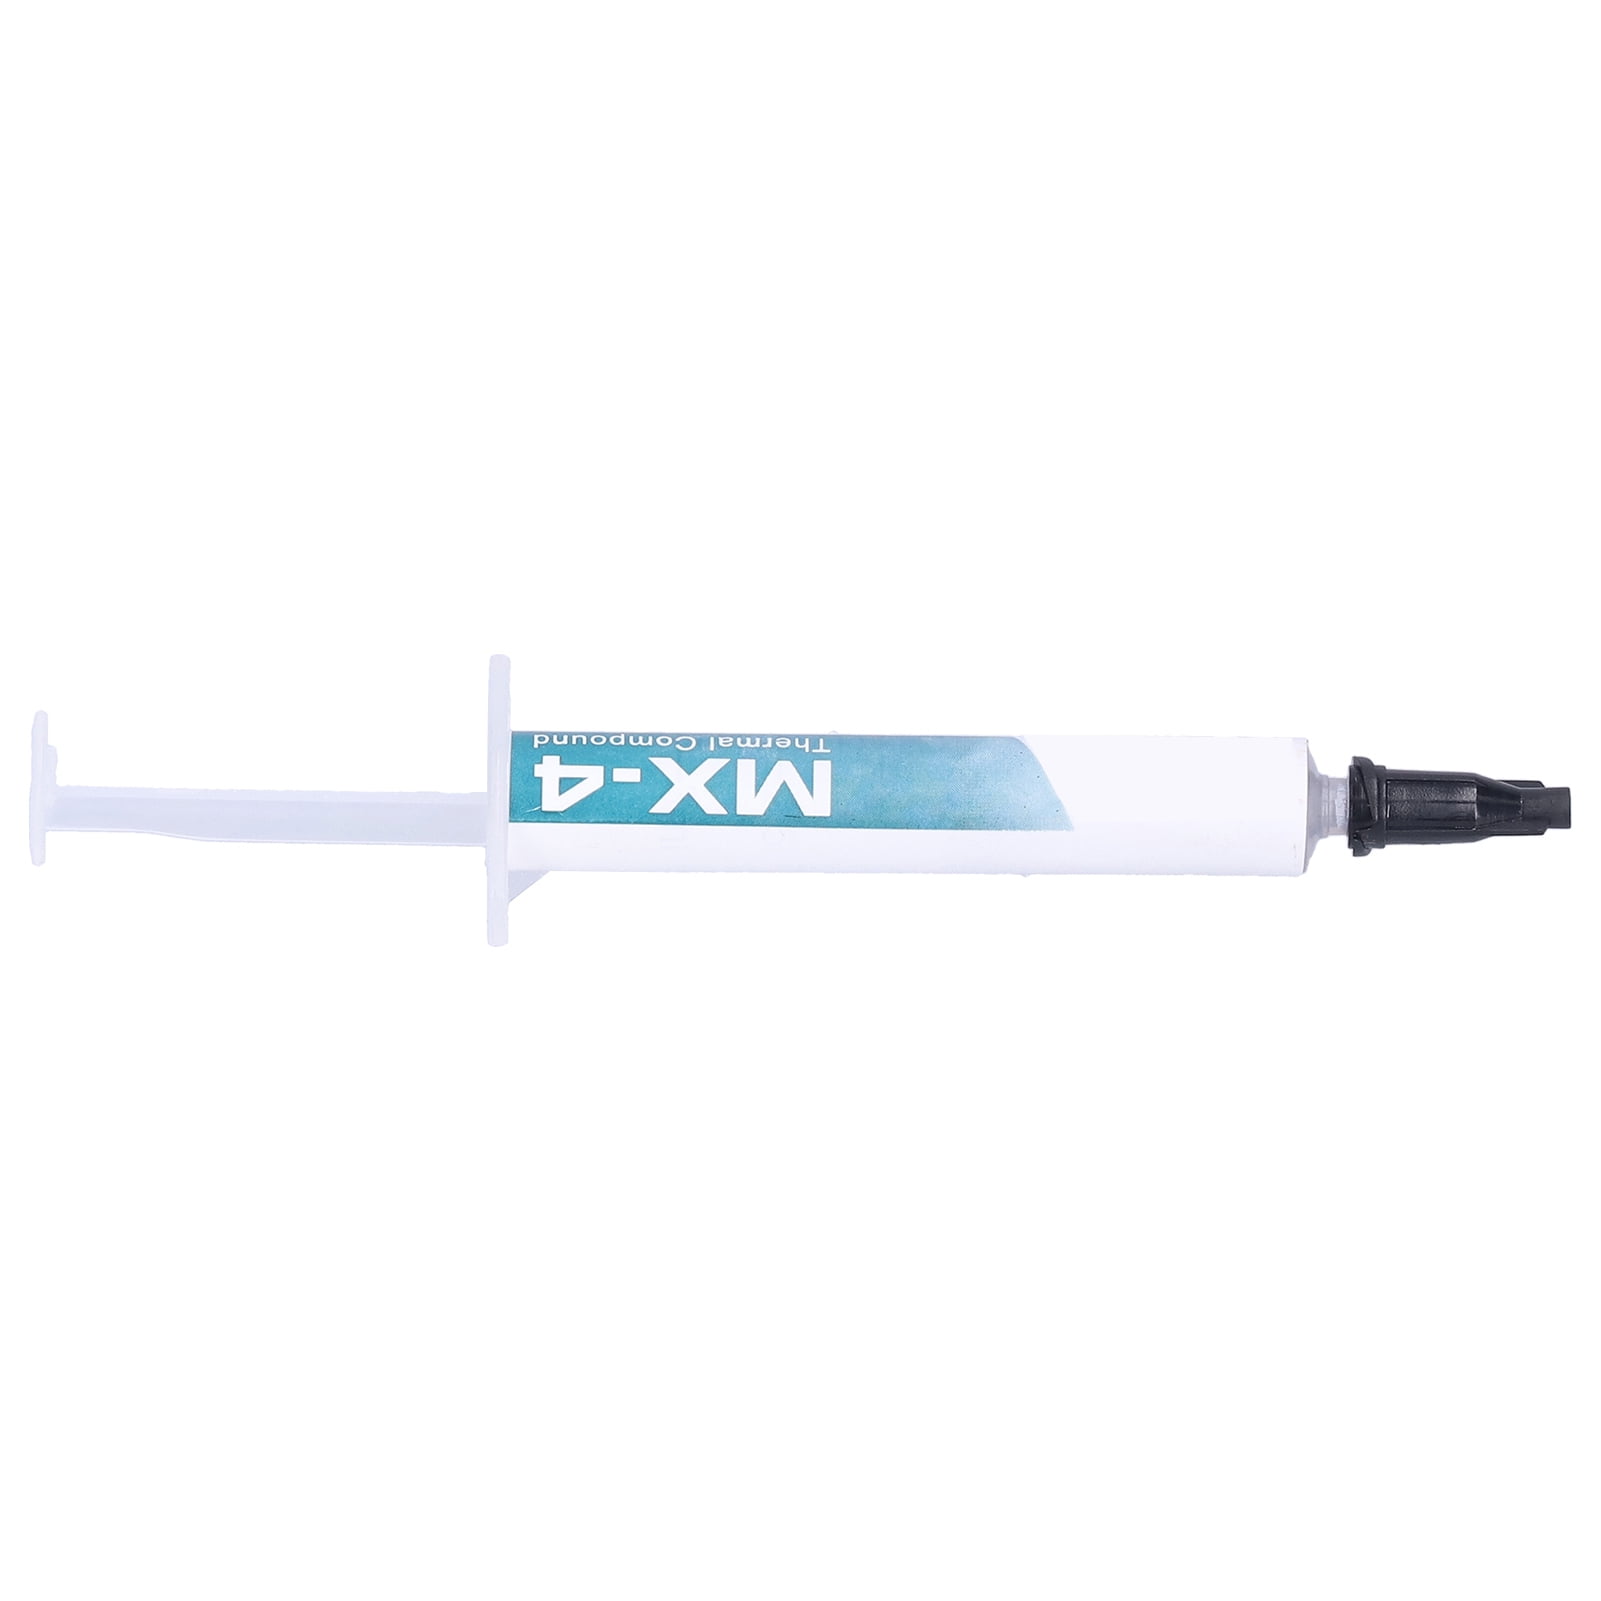 Mx4 Cooling Compound 4G Thermal Conductivity Silicone Paste for PC - China  Thermal Paste, Mx4 Cooling Compound 4G Thermal Paste